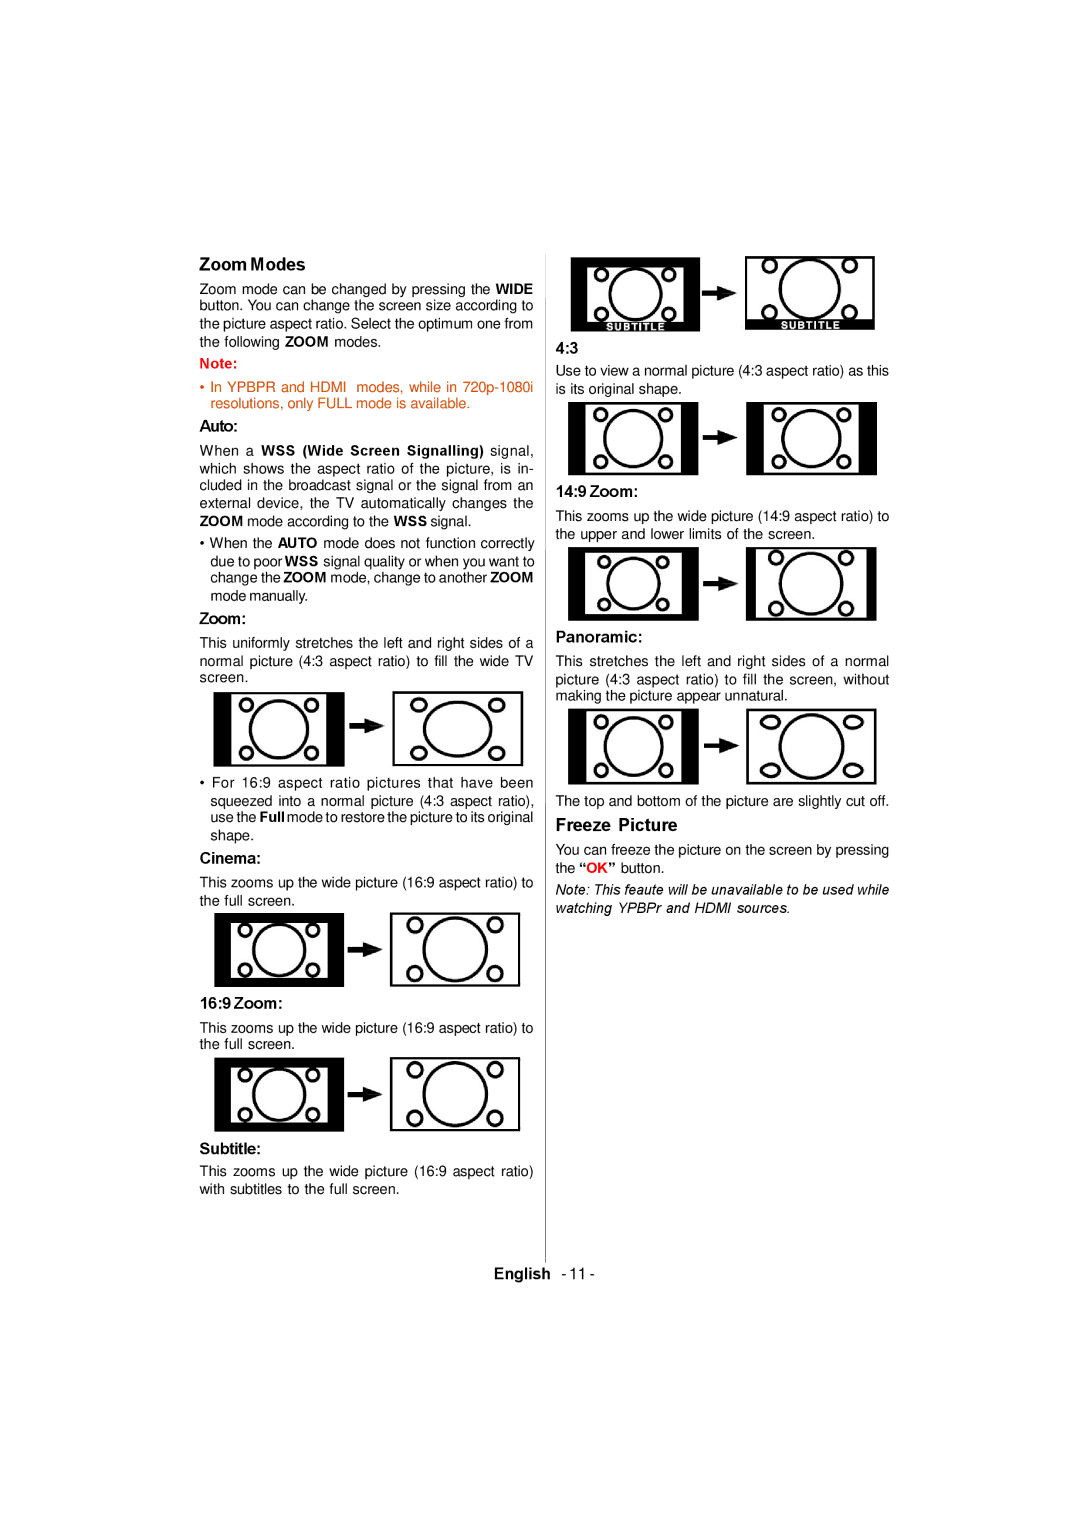 Sanyo CE26LC81-B instruction manual Zoom Modes, Freeze Picture 